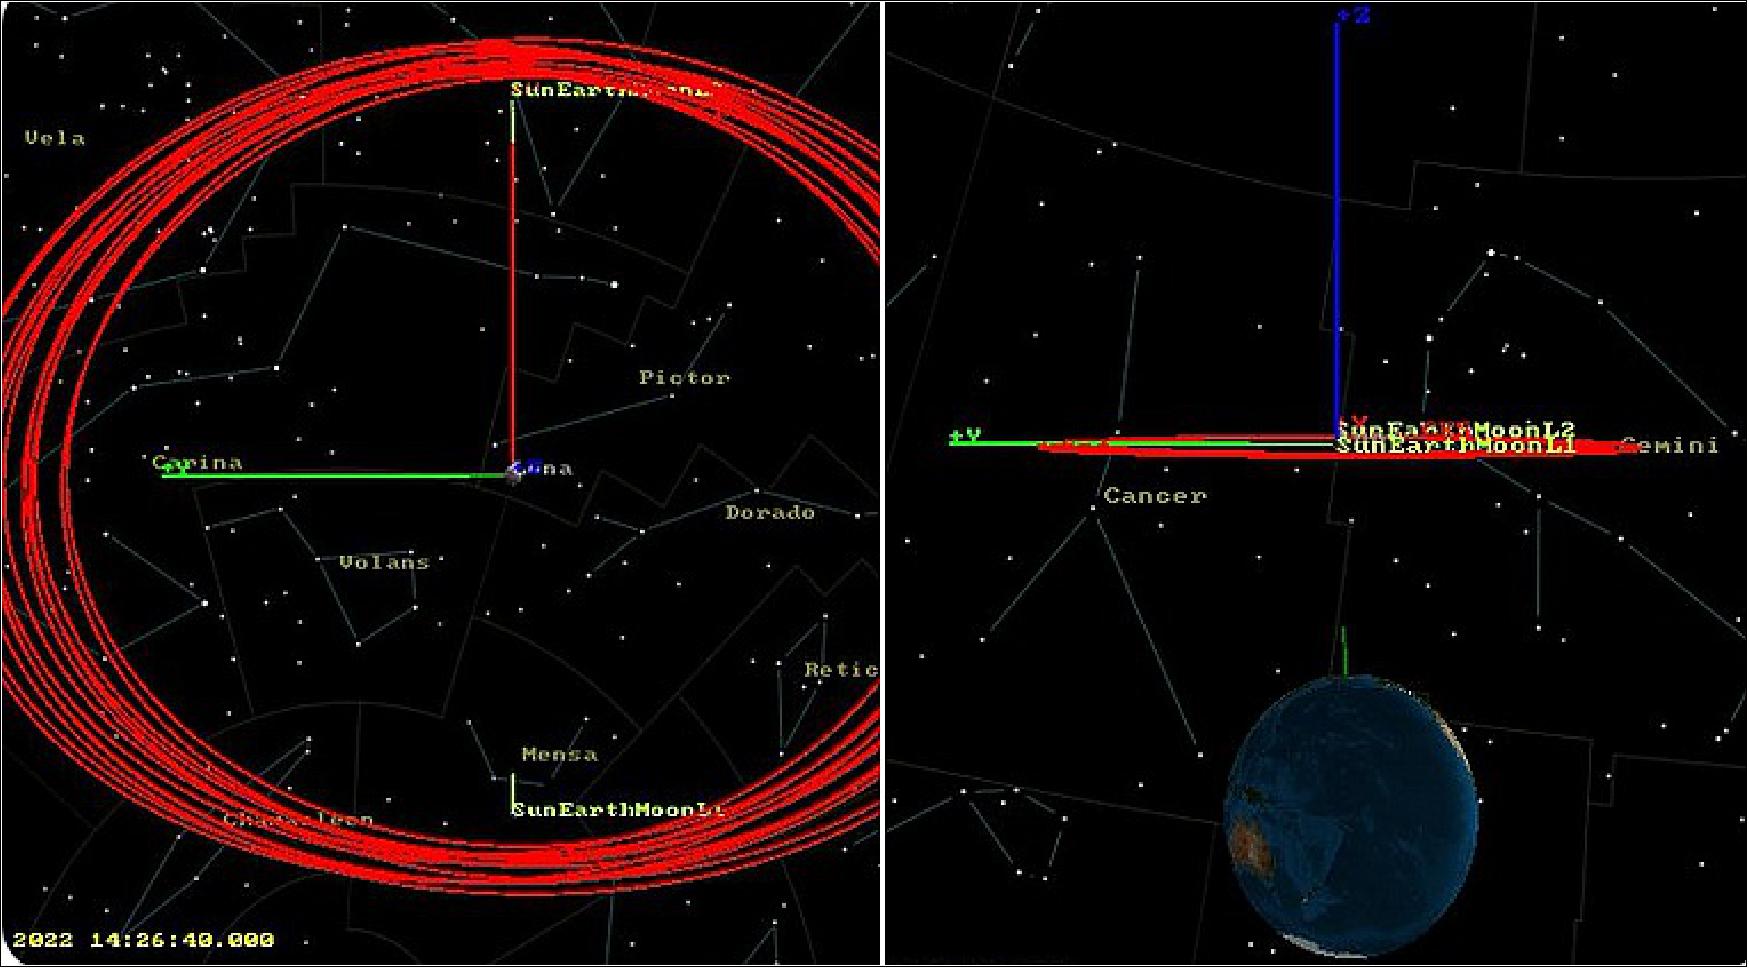 Figure 13: A DRO of the Moon as seen from above orbits around the Earth-Moon L1 and L2 points and is called retrograde as it orbits in the direction opposite of the Moon's orbital motion around Earth. From Earth it would appear to move around the Moon in a periodic manner over weeks (image credit: Scott Tilley)